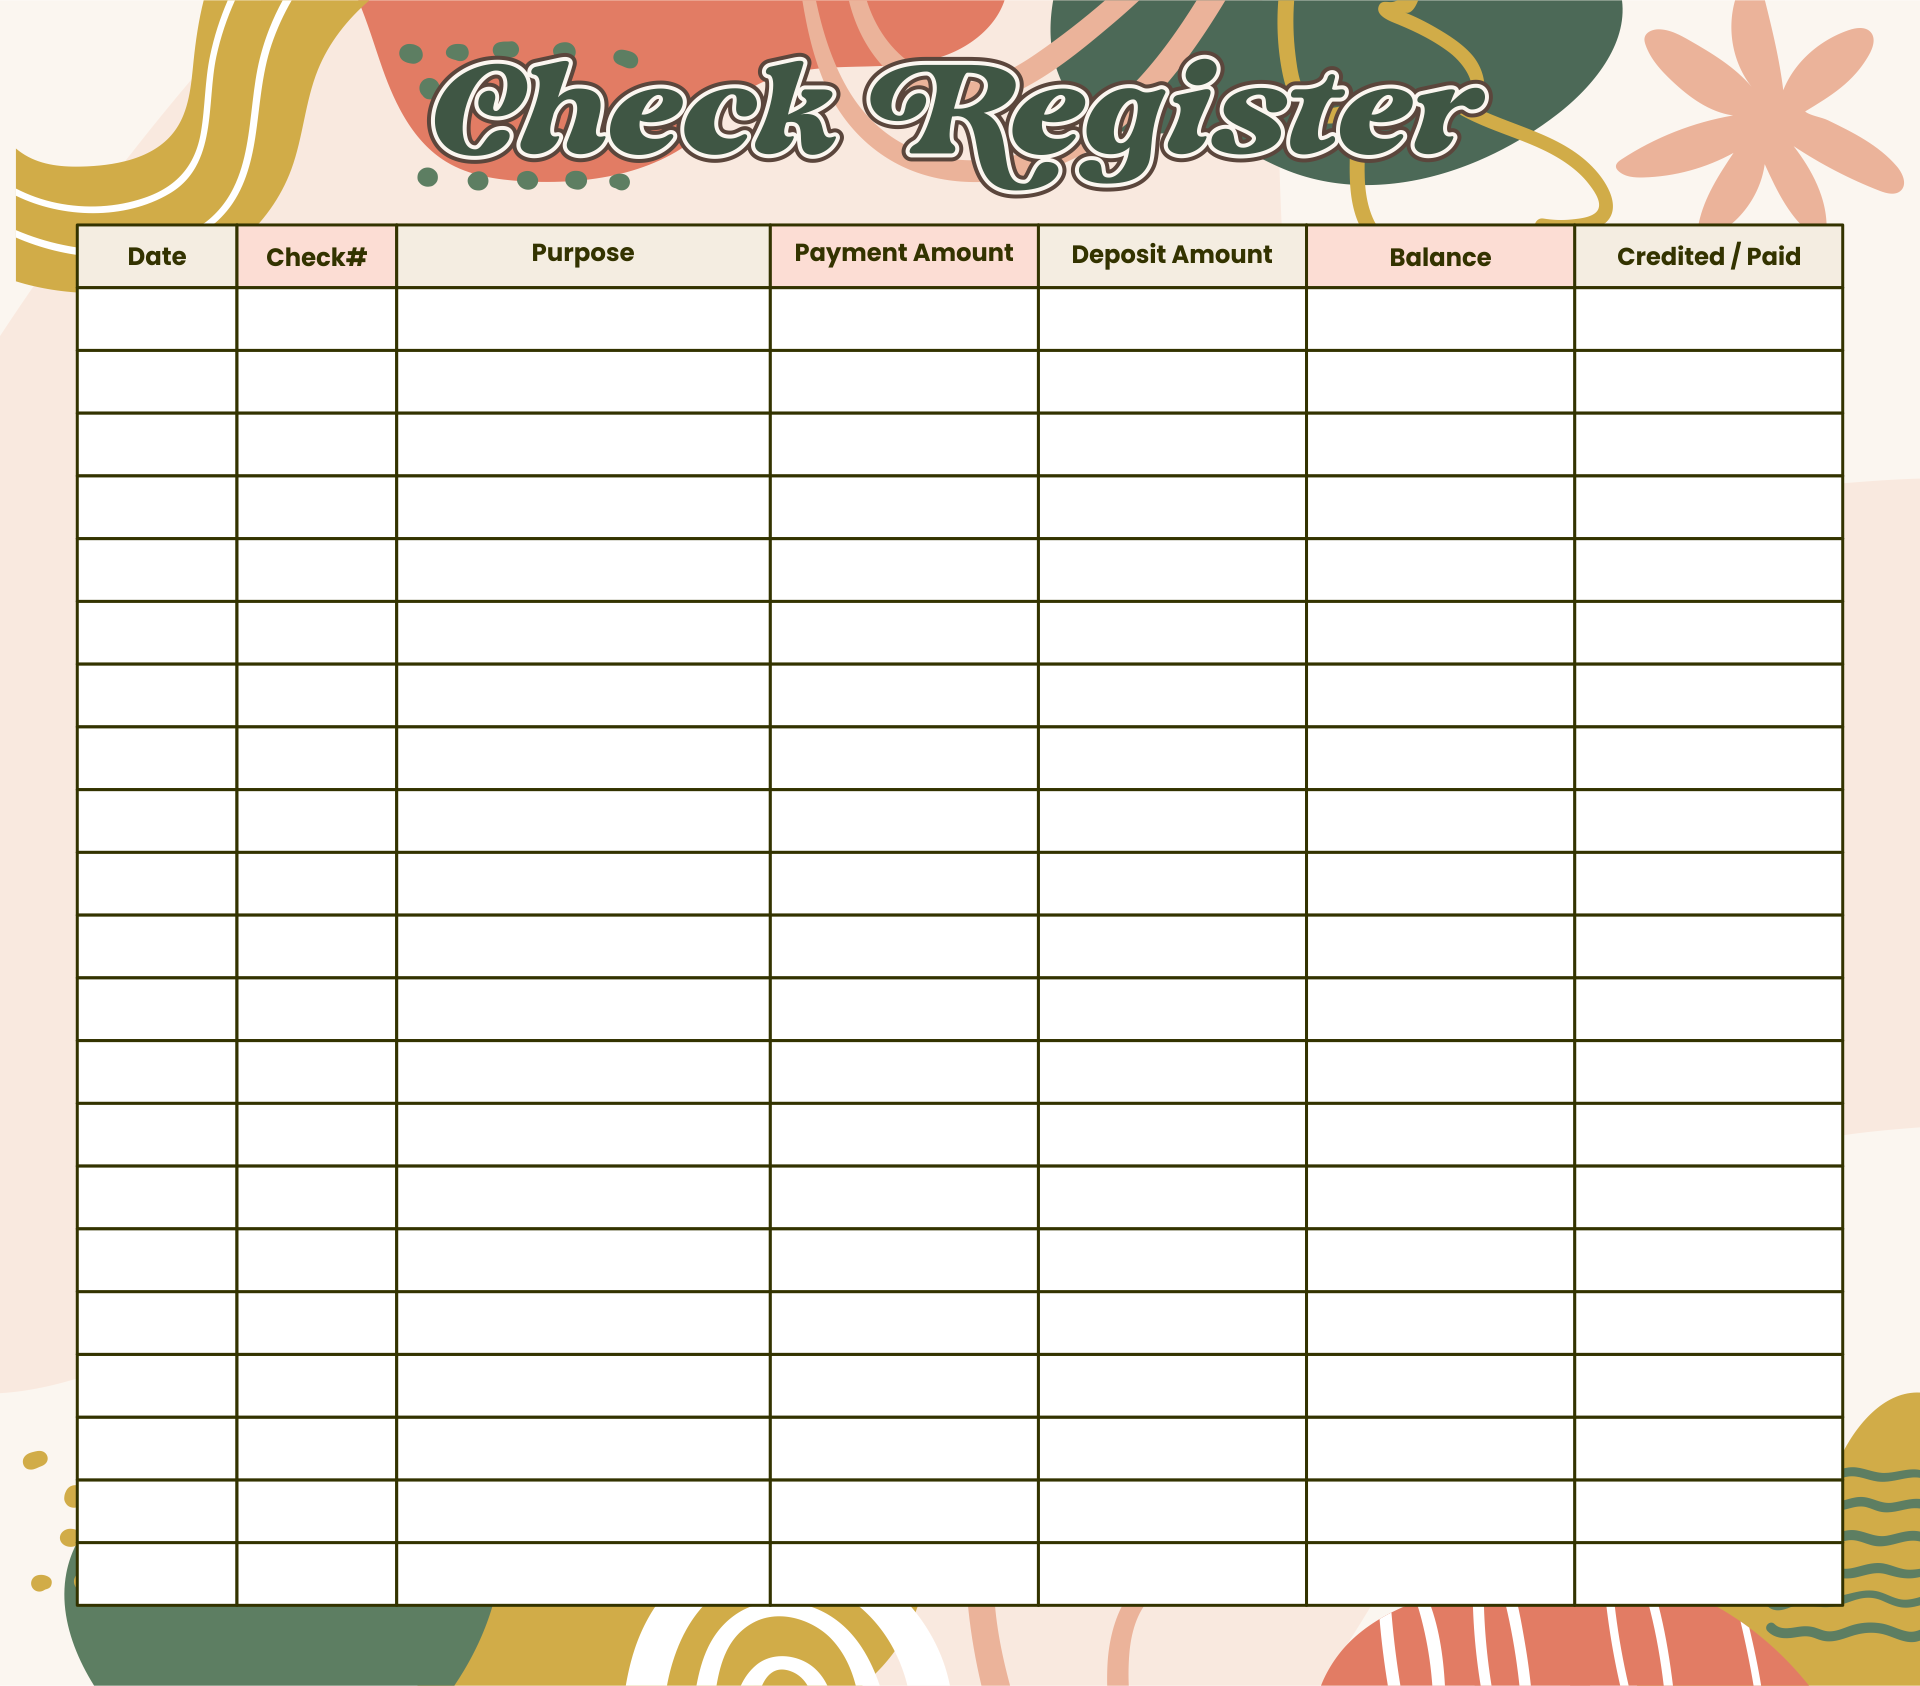 7 Best Images of Check Register Full Page Printable - Free ...